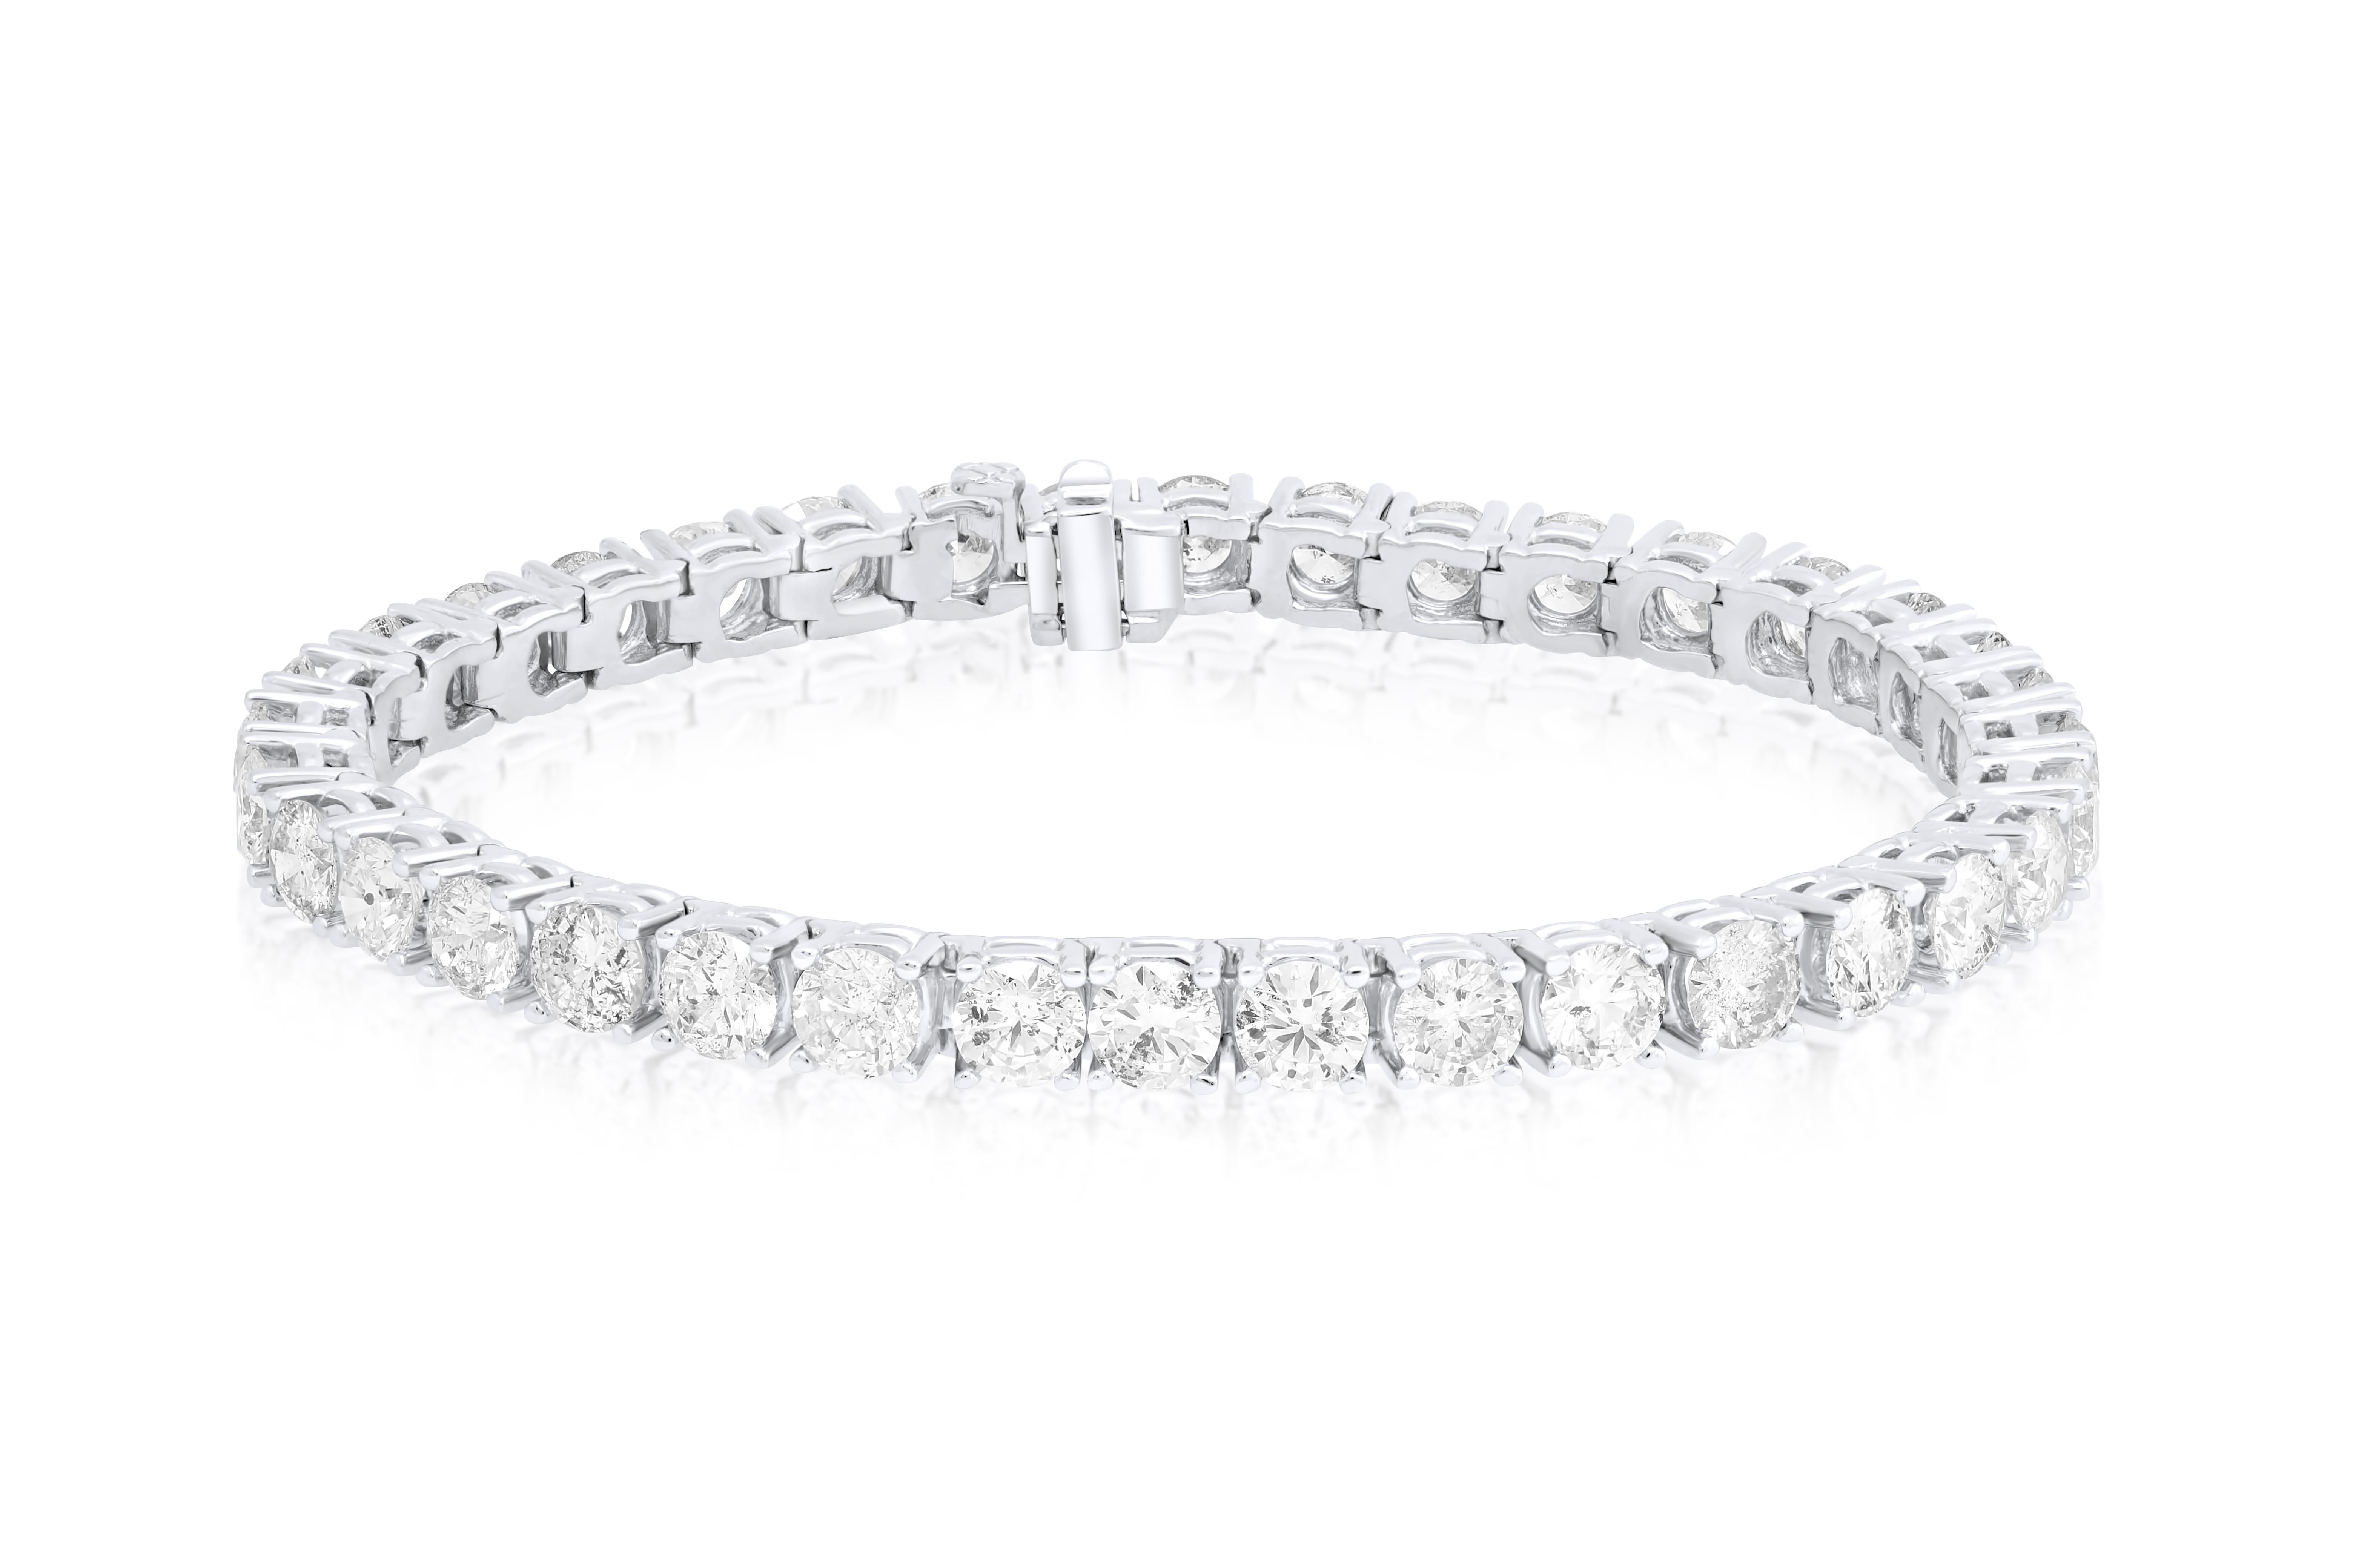 18 kt white gold 4 prong diamond tennis bracelet adorned with 12.01 cts tw of round diamonds (37 stones)
Diana M. is a leading supplier of top-quality fine jewelry for over 35 years.
Diana M is one-stop shop for all your jewelry shopping, carrying